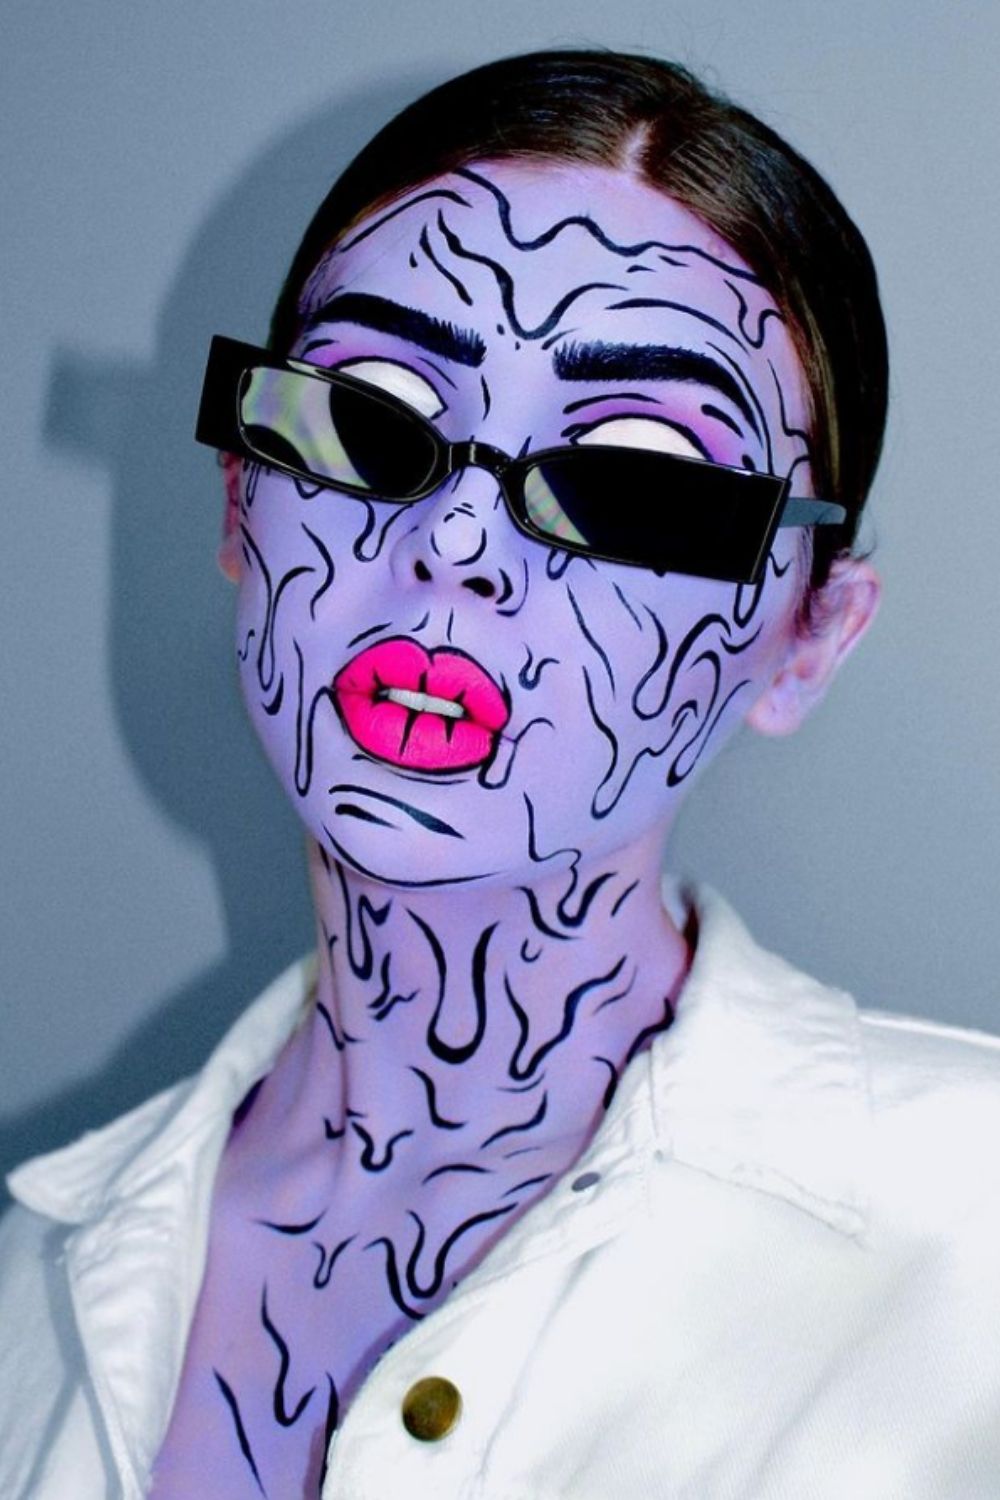 Fluorescent and black to create humorous makeup